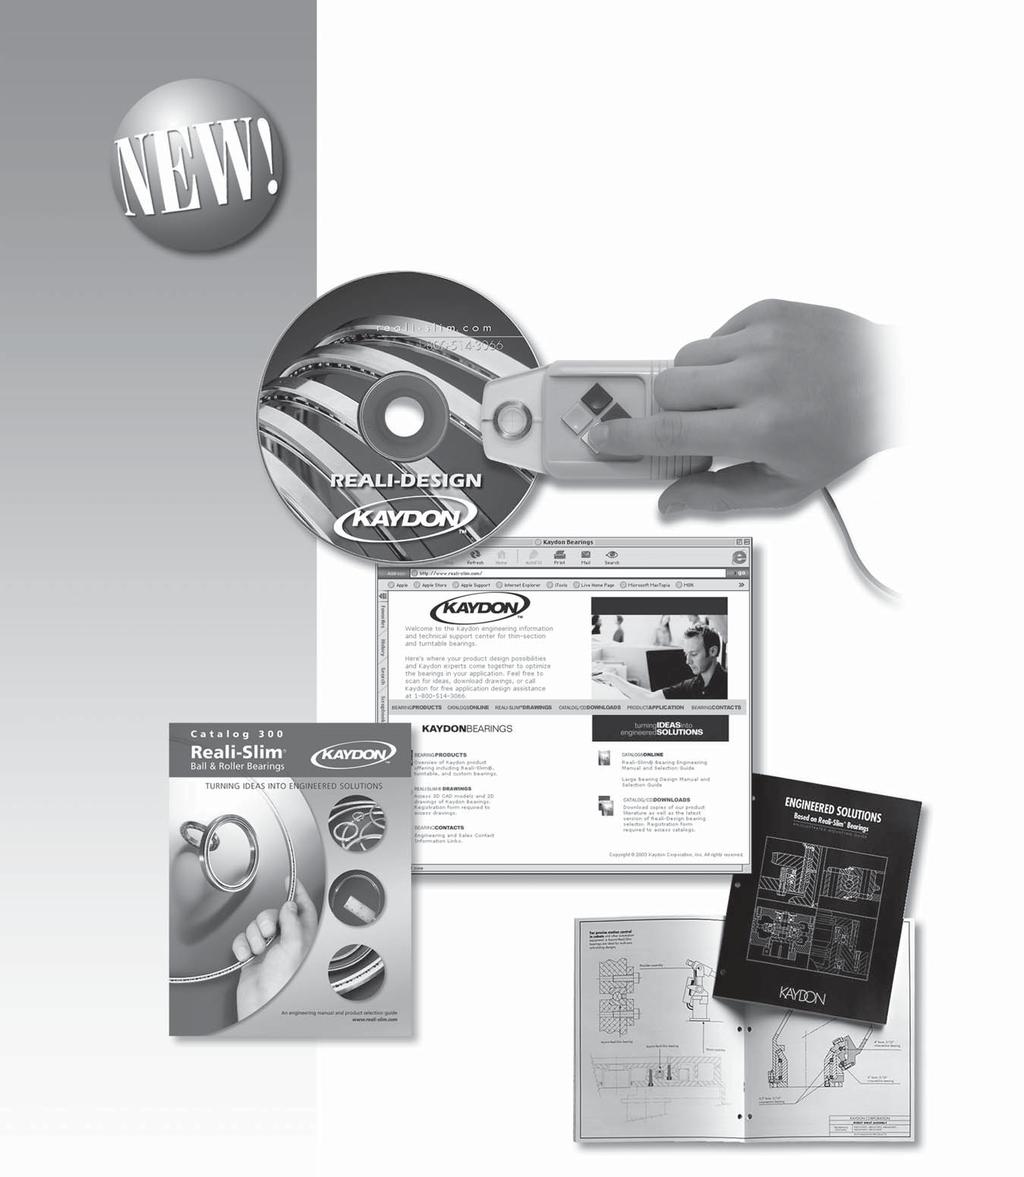 Reali-Slim s Catalog 300 KAYDON Corporation 2004 For latest releases: catalog, software, or CAD